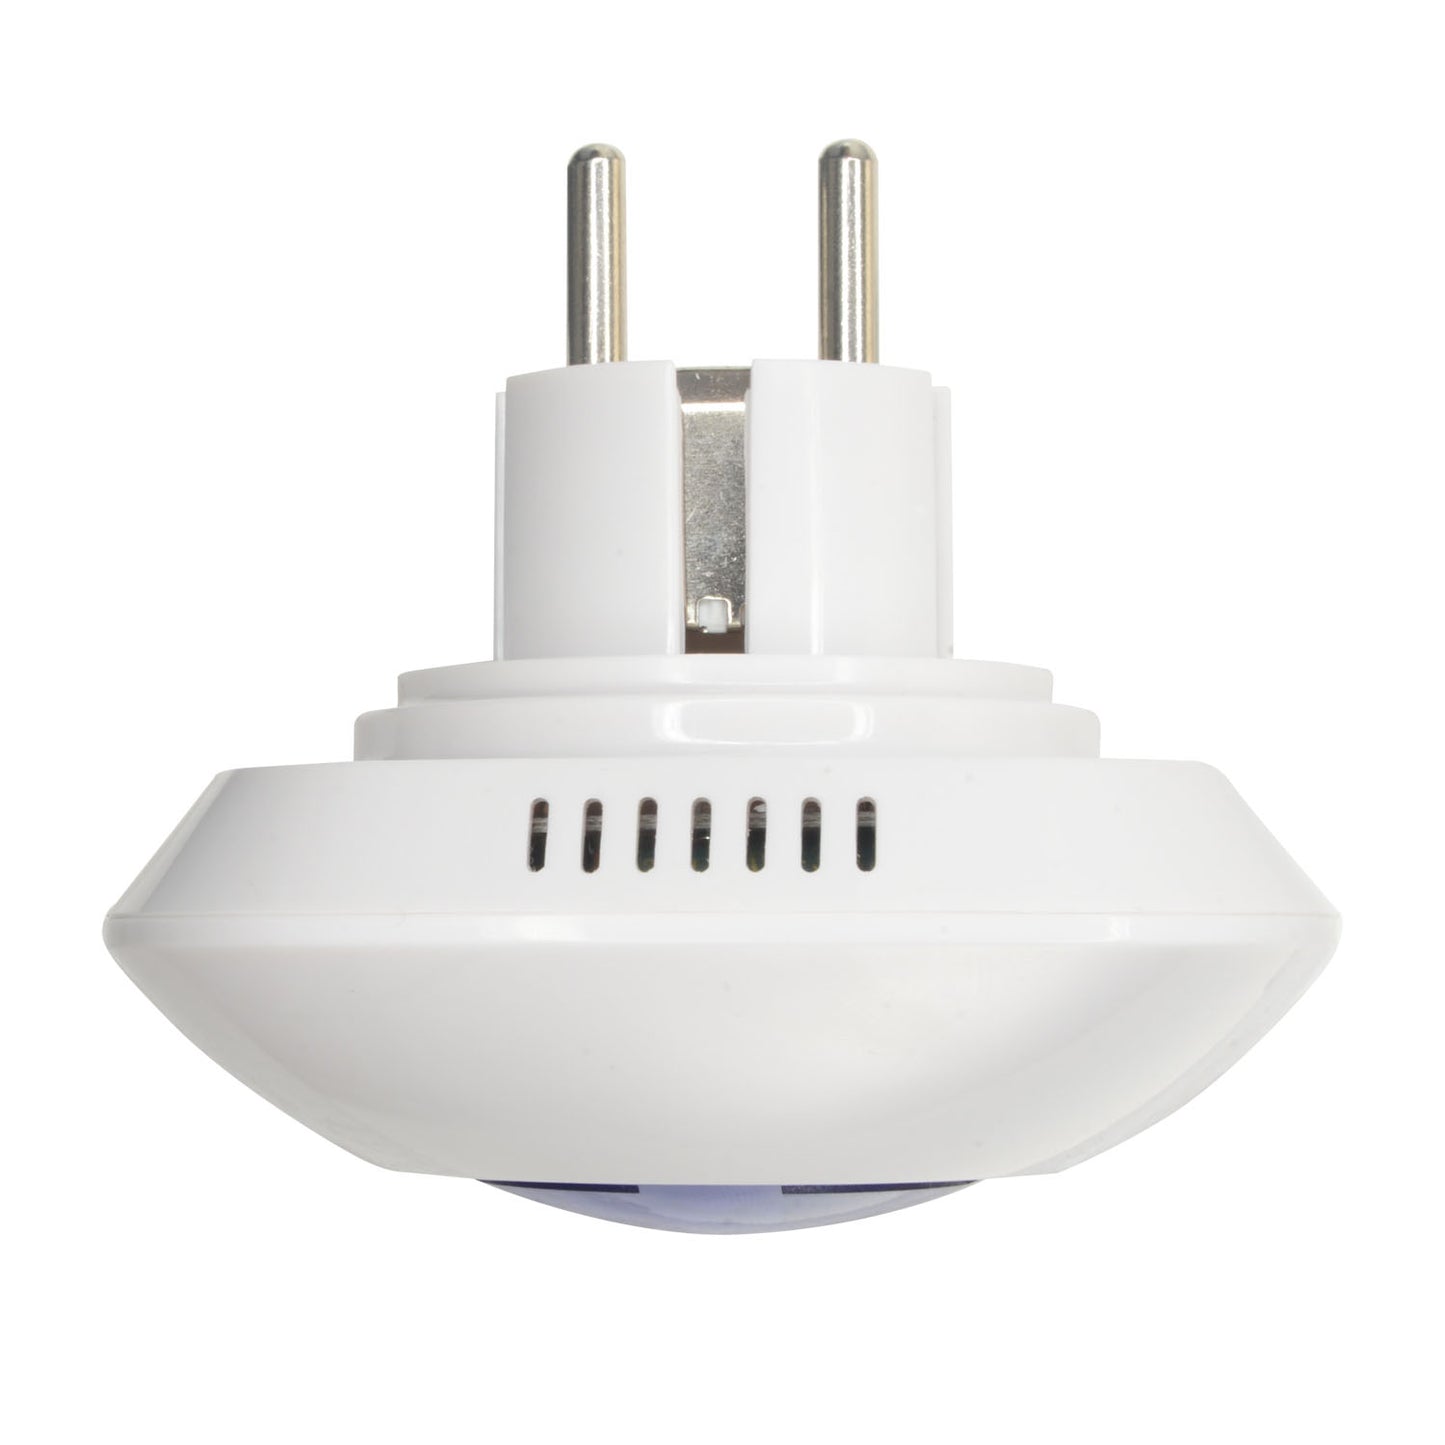 Indoor siren - Wireless - Indoor antenna - Power 90 dB and flashing light - Indoor use - Plug&amp;Play direct connection to AC 220 V